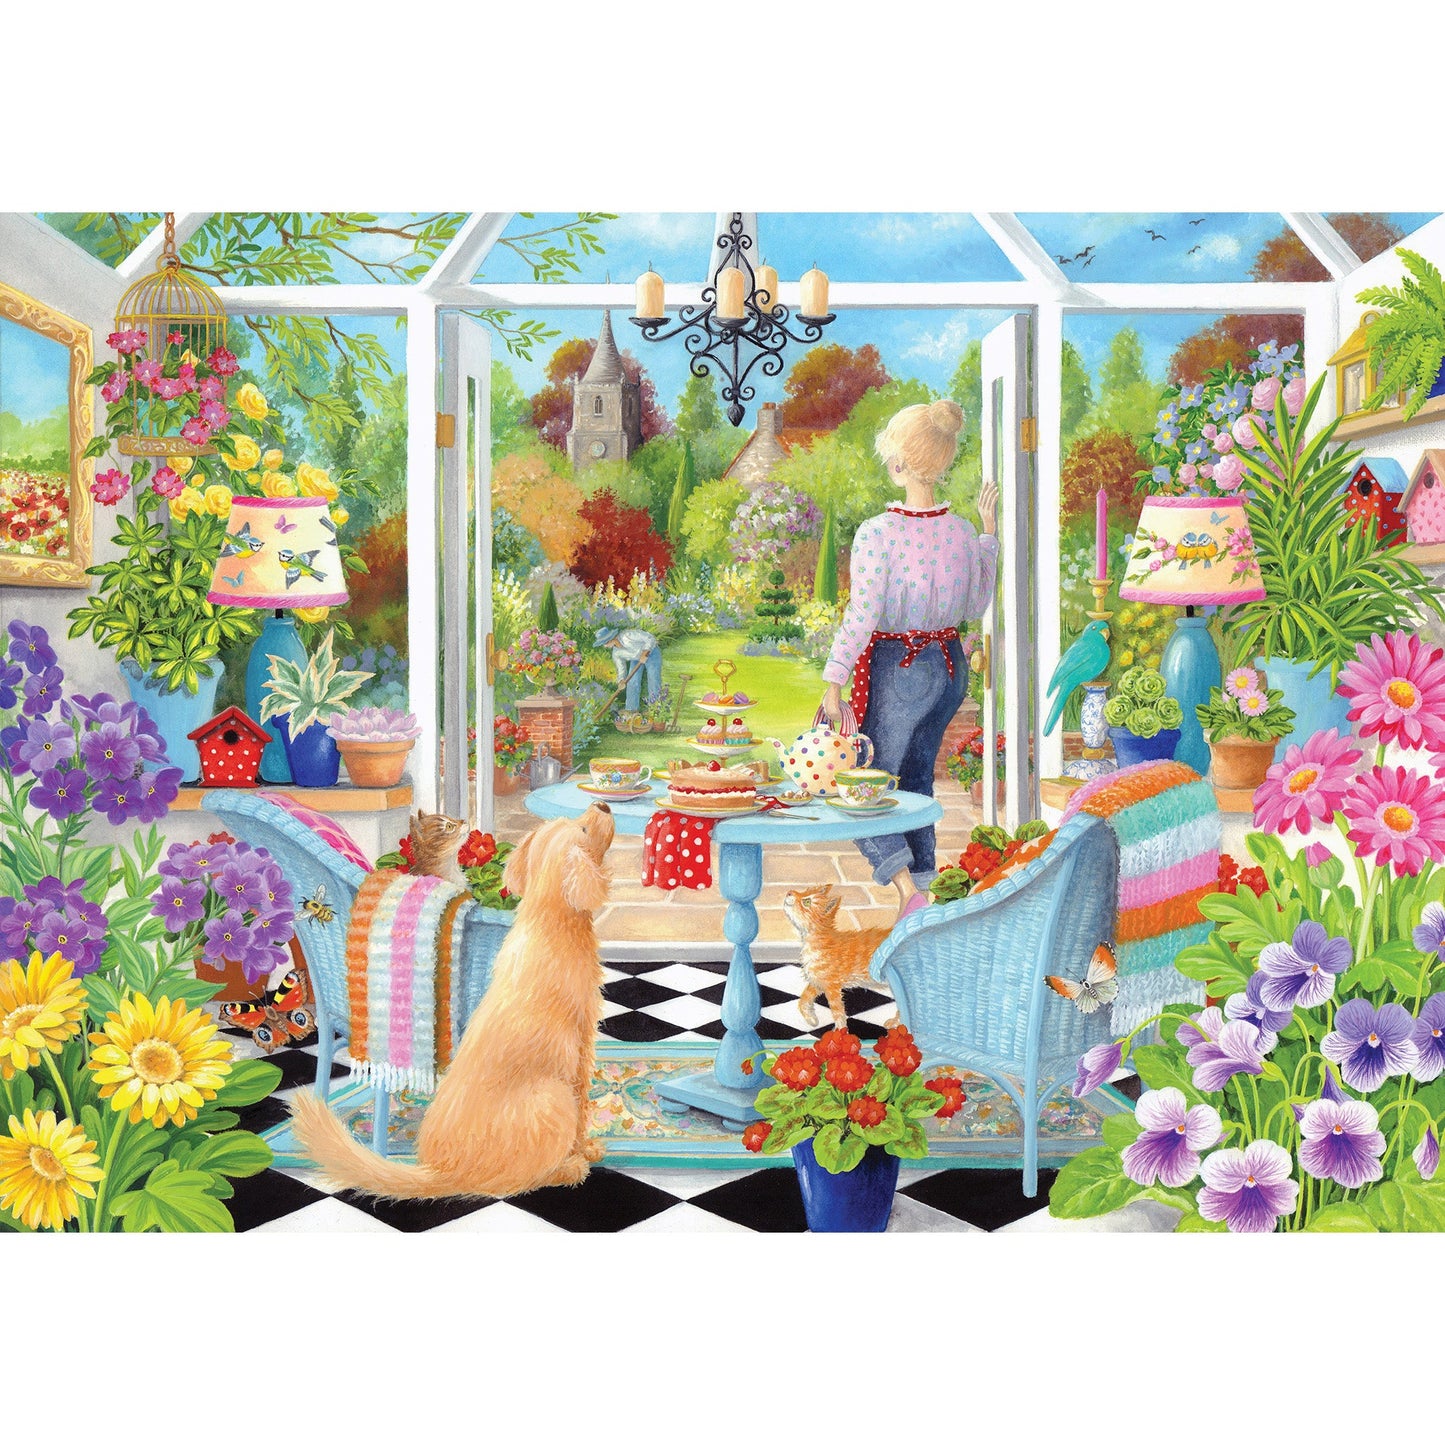 Gibsons - Summer Reflections - 100 Piece Jigsaw Puzzle